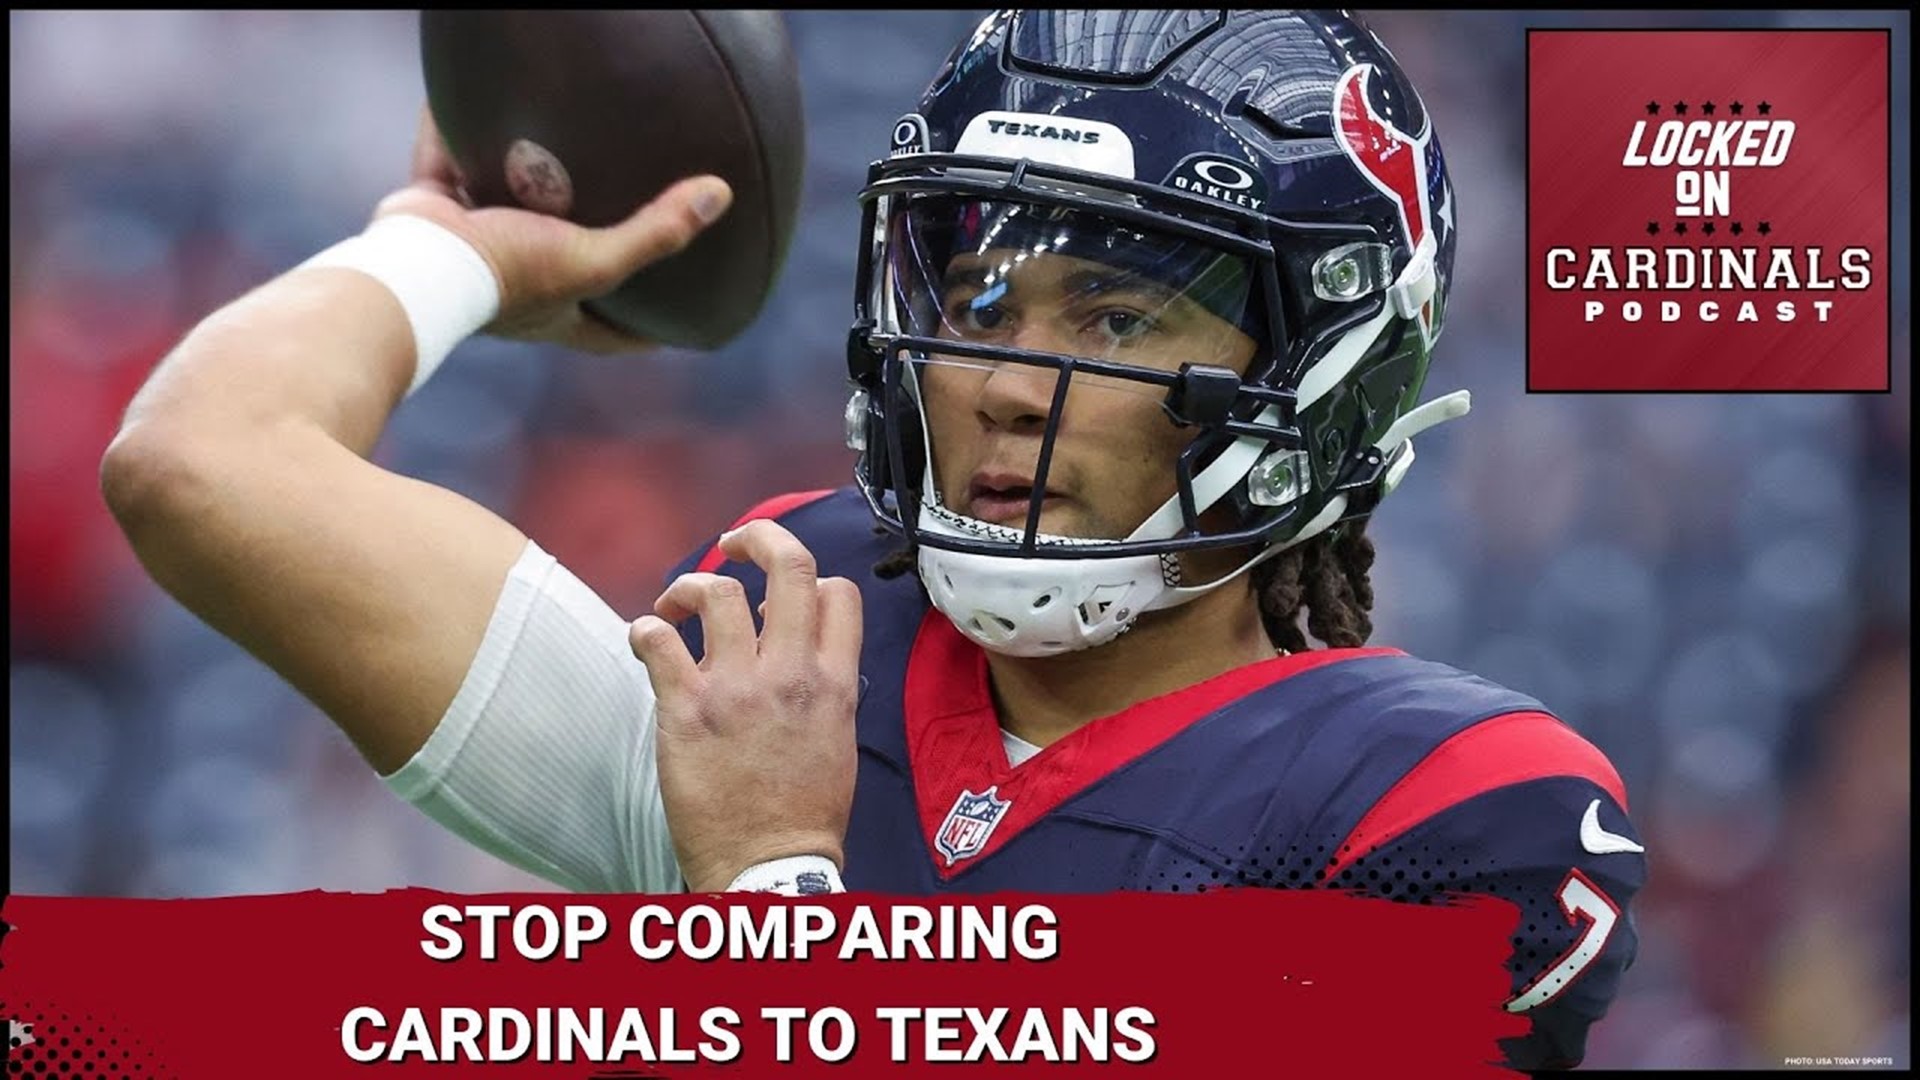 Arizona Cardinals are on their own hard reset journey with Monti Ossenfort, Jonathan Gannon, and Kyler Murray leading the charge.